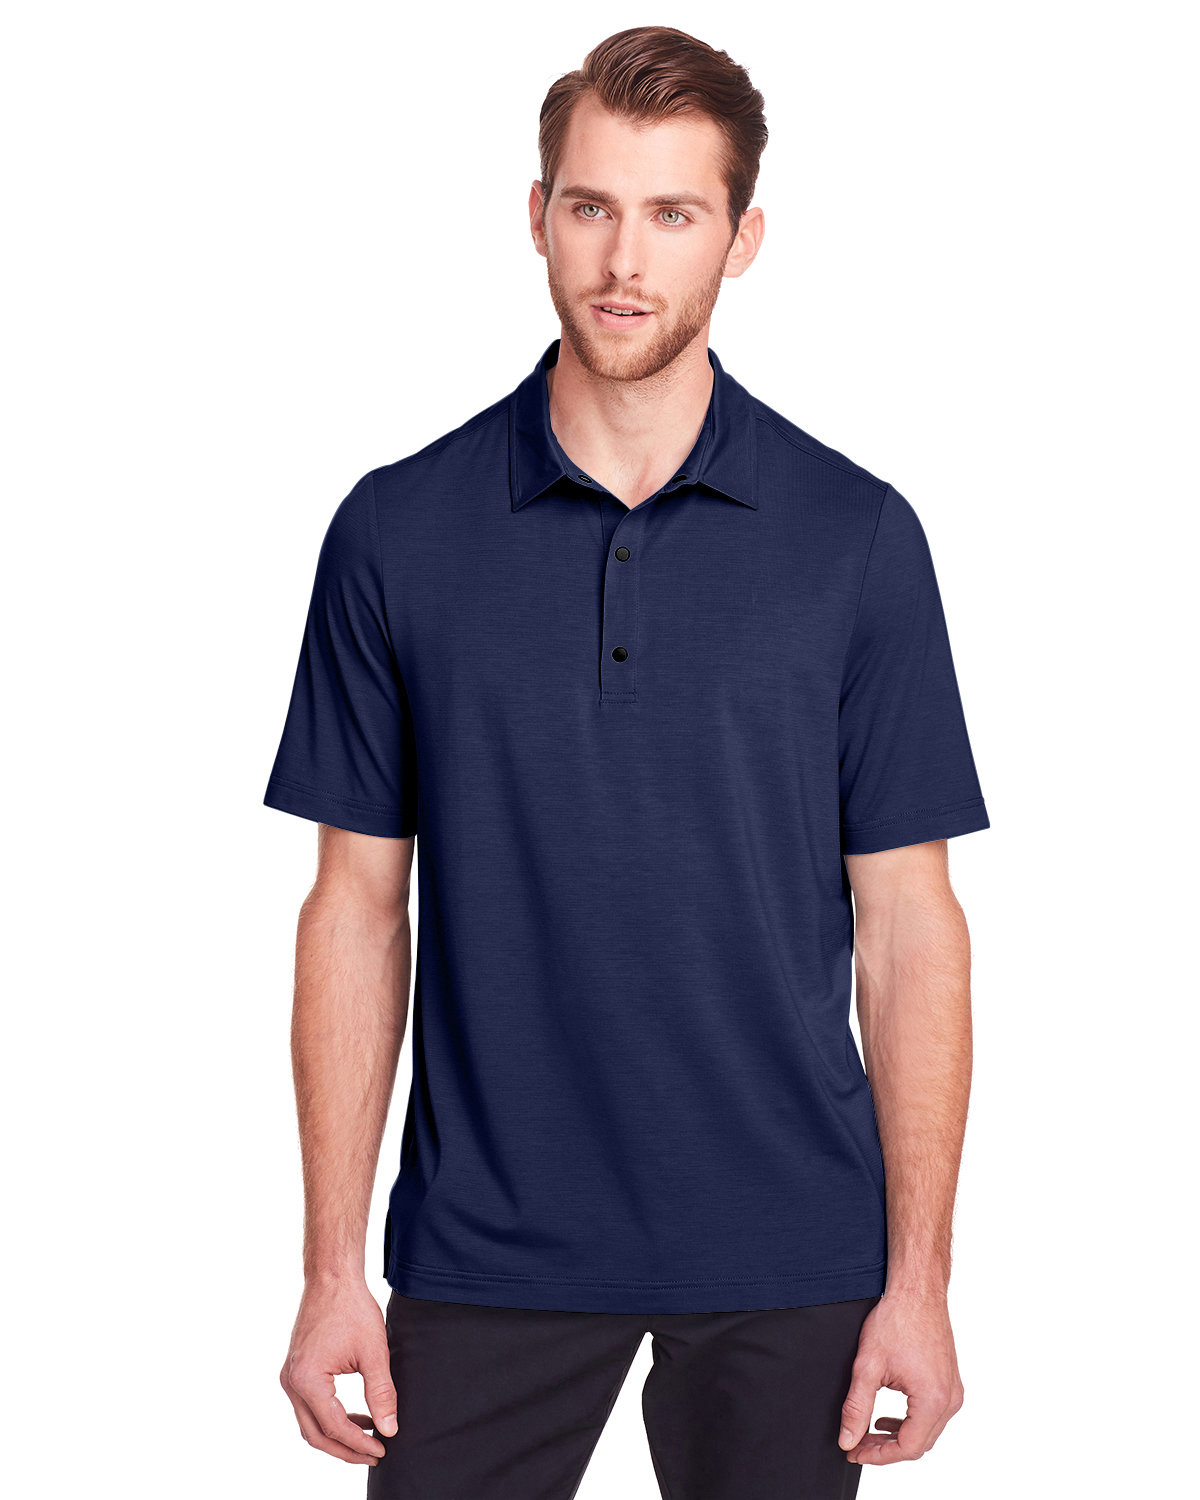 North End Men's Jaq Snap-Up Stretch Performance Polo CLASSIC NAVY 